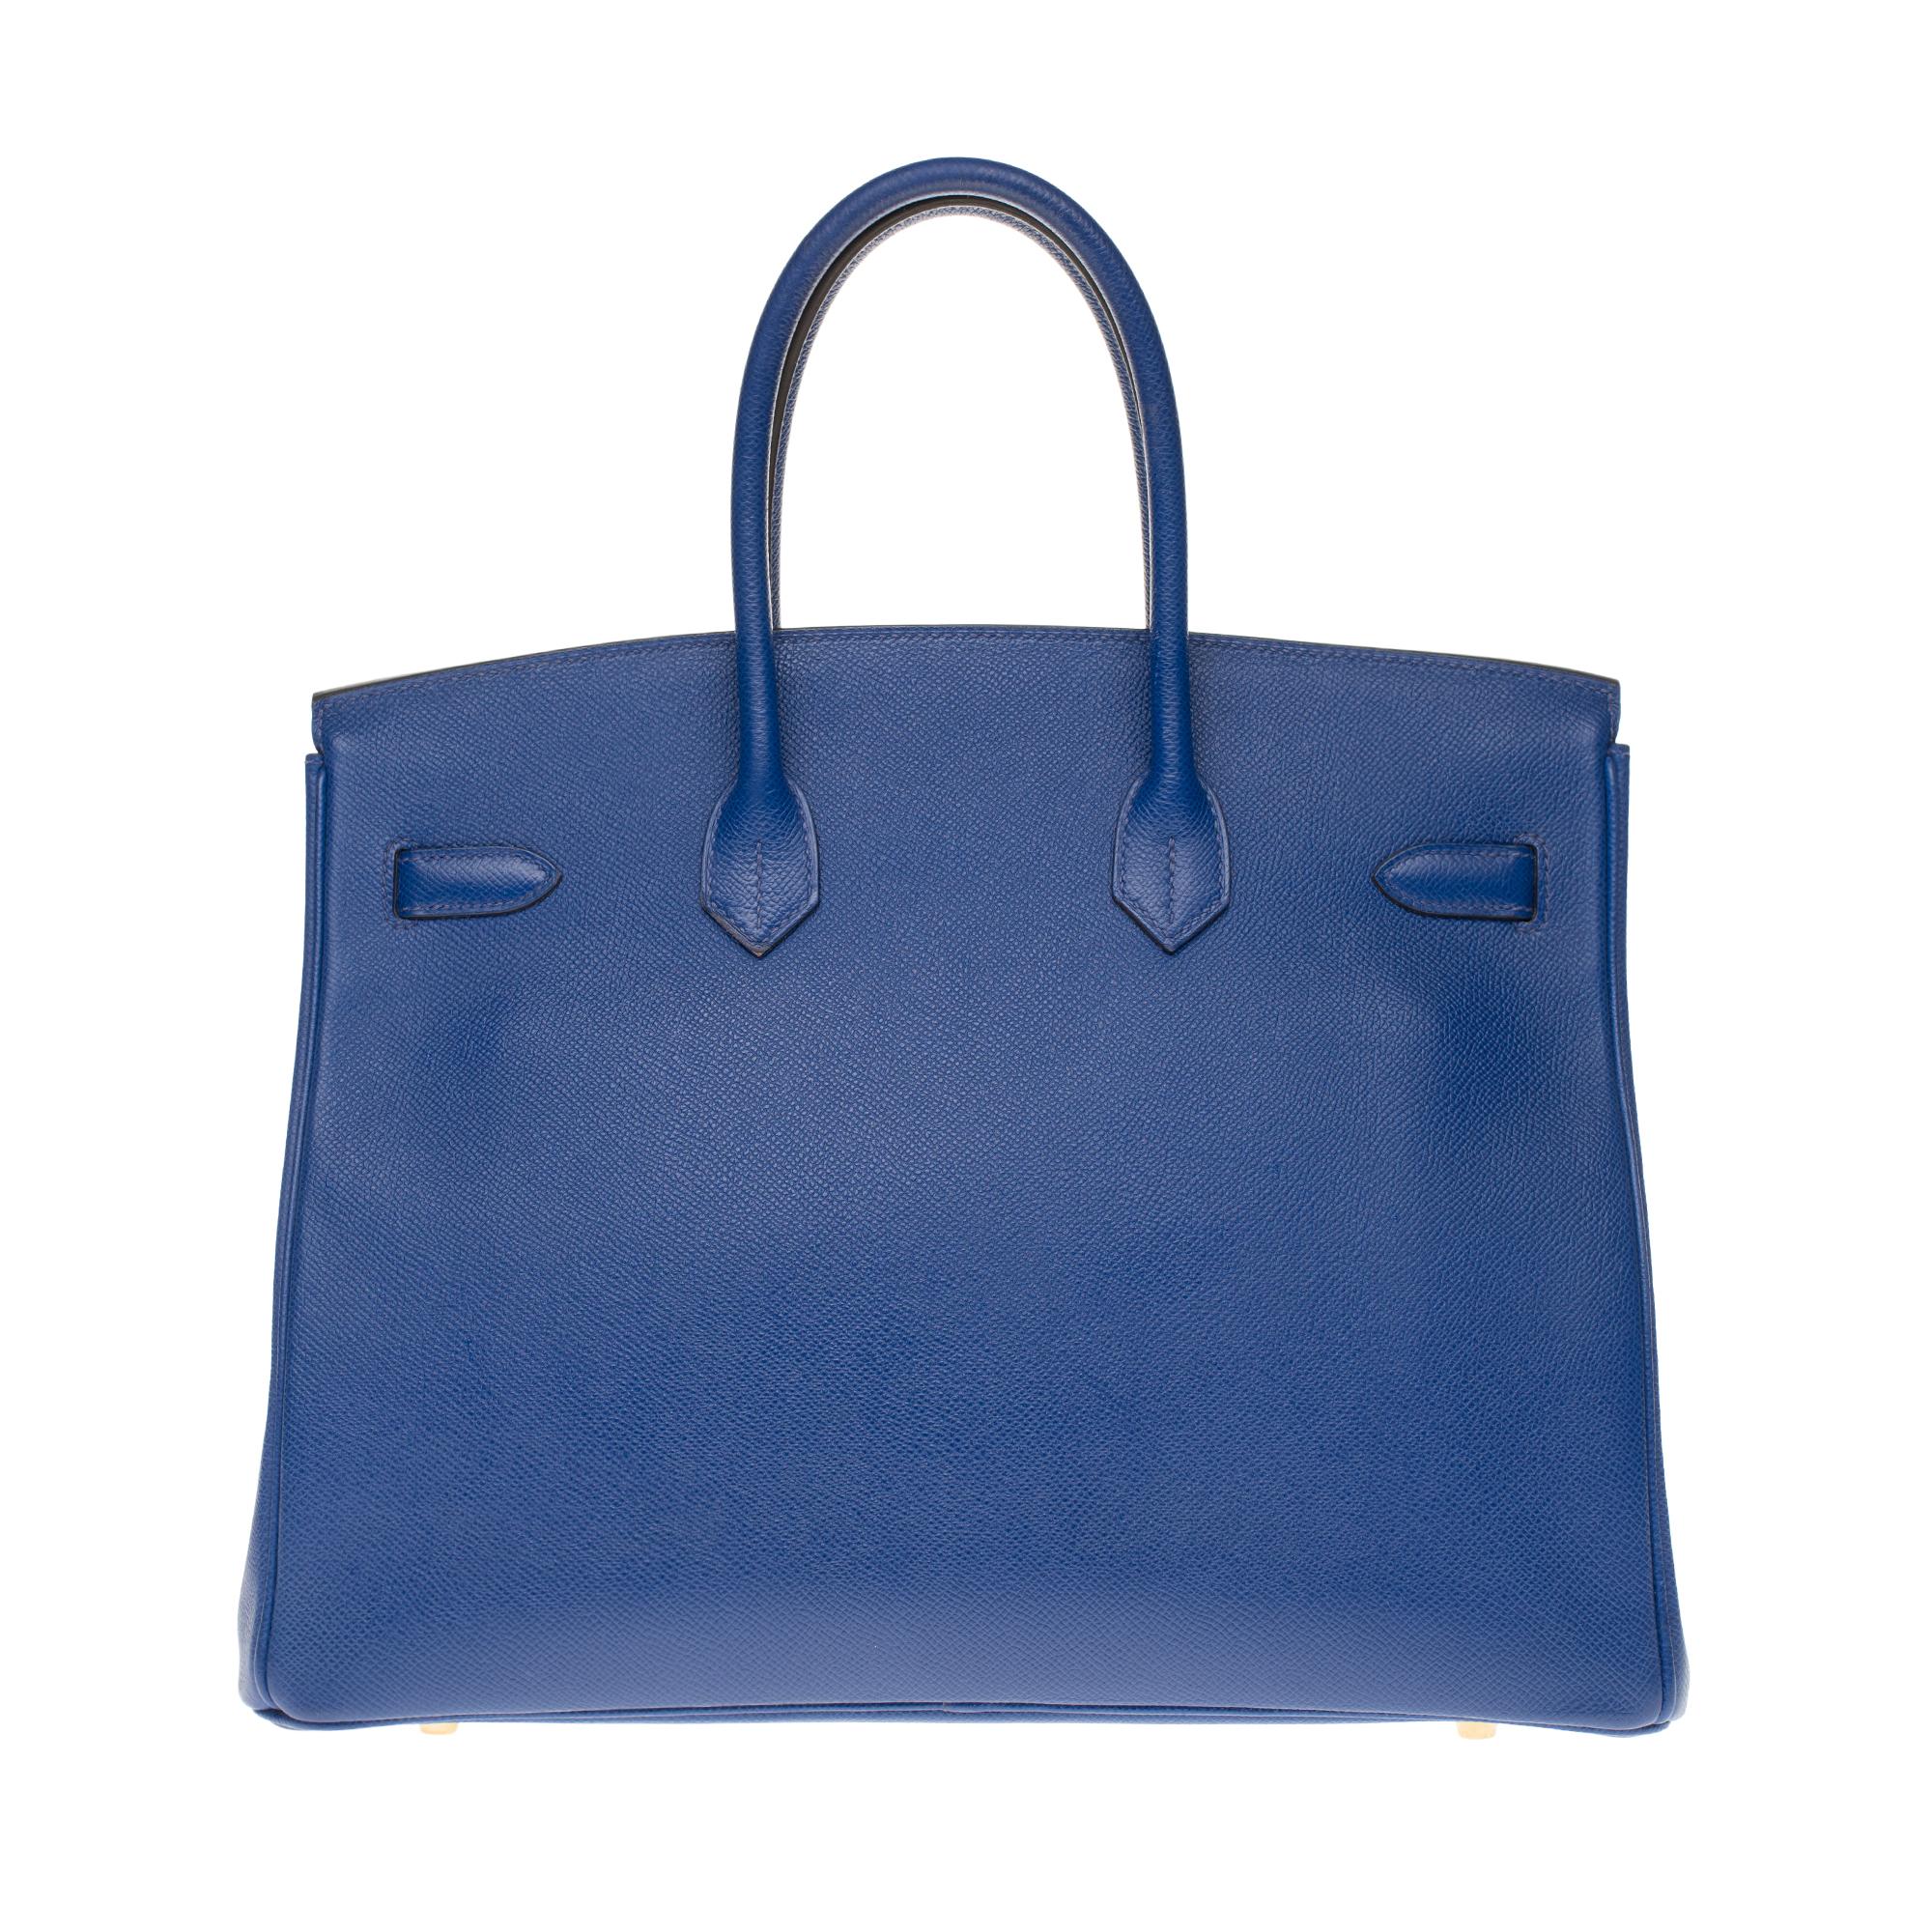 Stunning Hermes Birkin 35 cm handbag in bleu électrique Epsom leather, gold metal trim, double blue leather handle for hand-hold.

Shut down by flap.
Blue leather inner lining, zipped pocket, patch pocket.
Signature: 